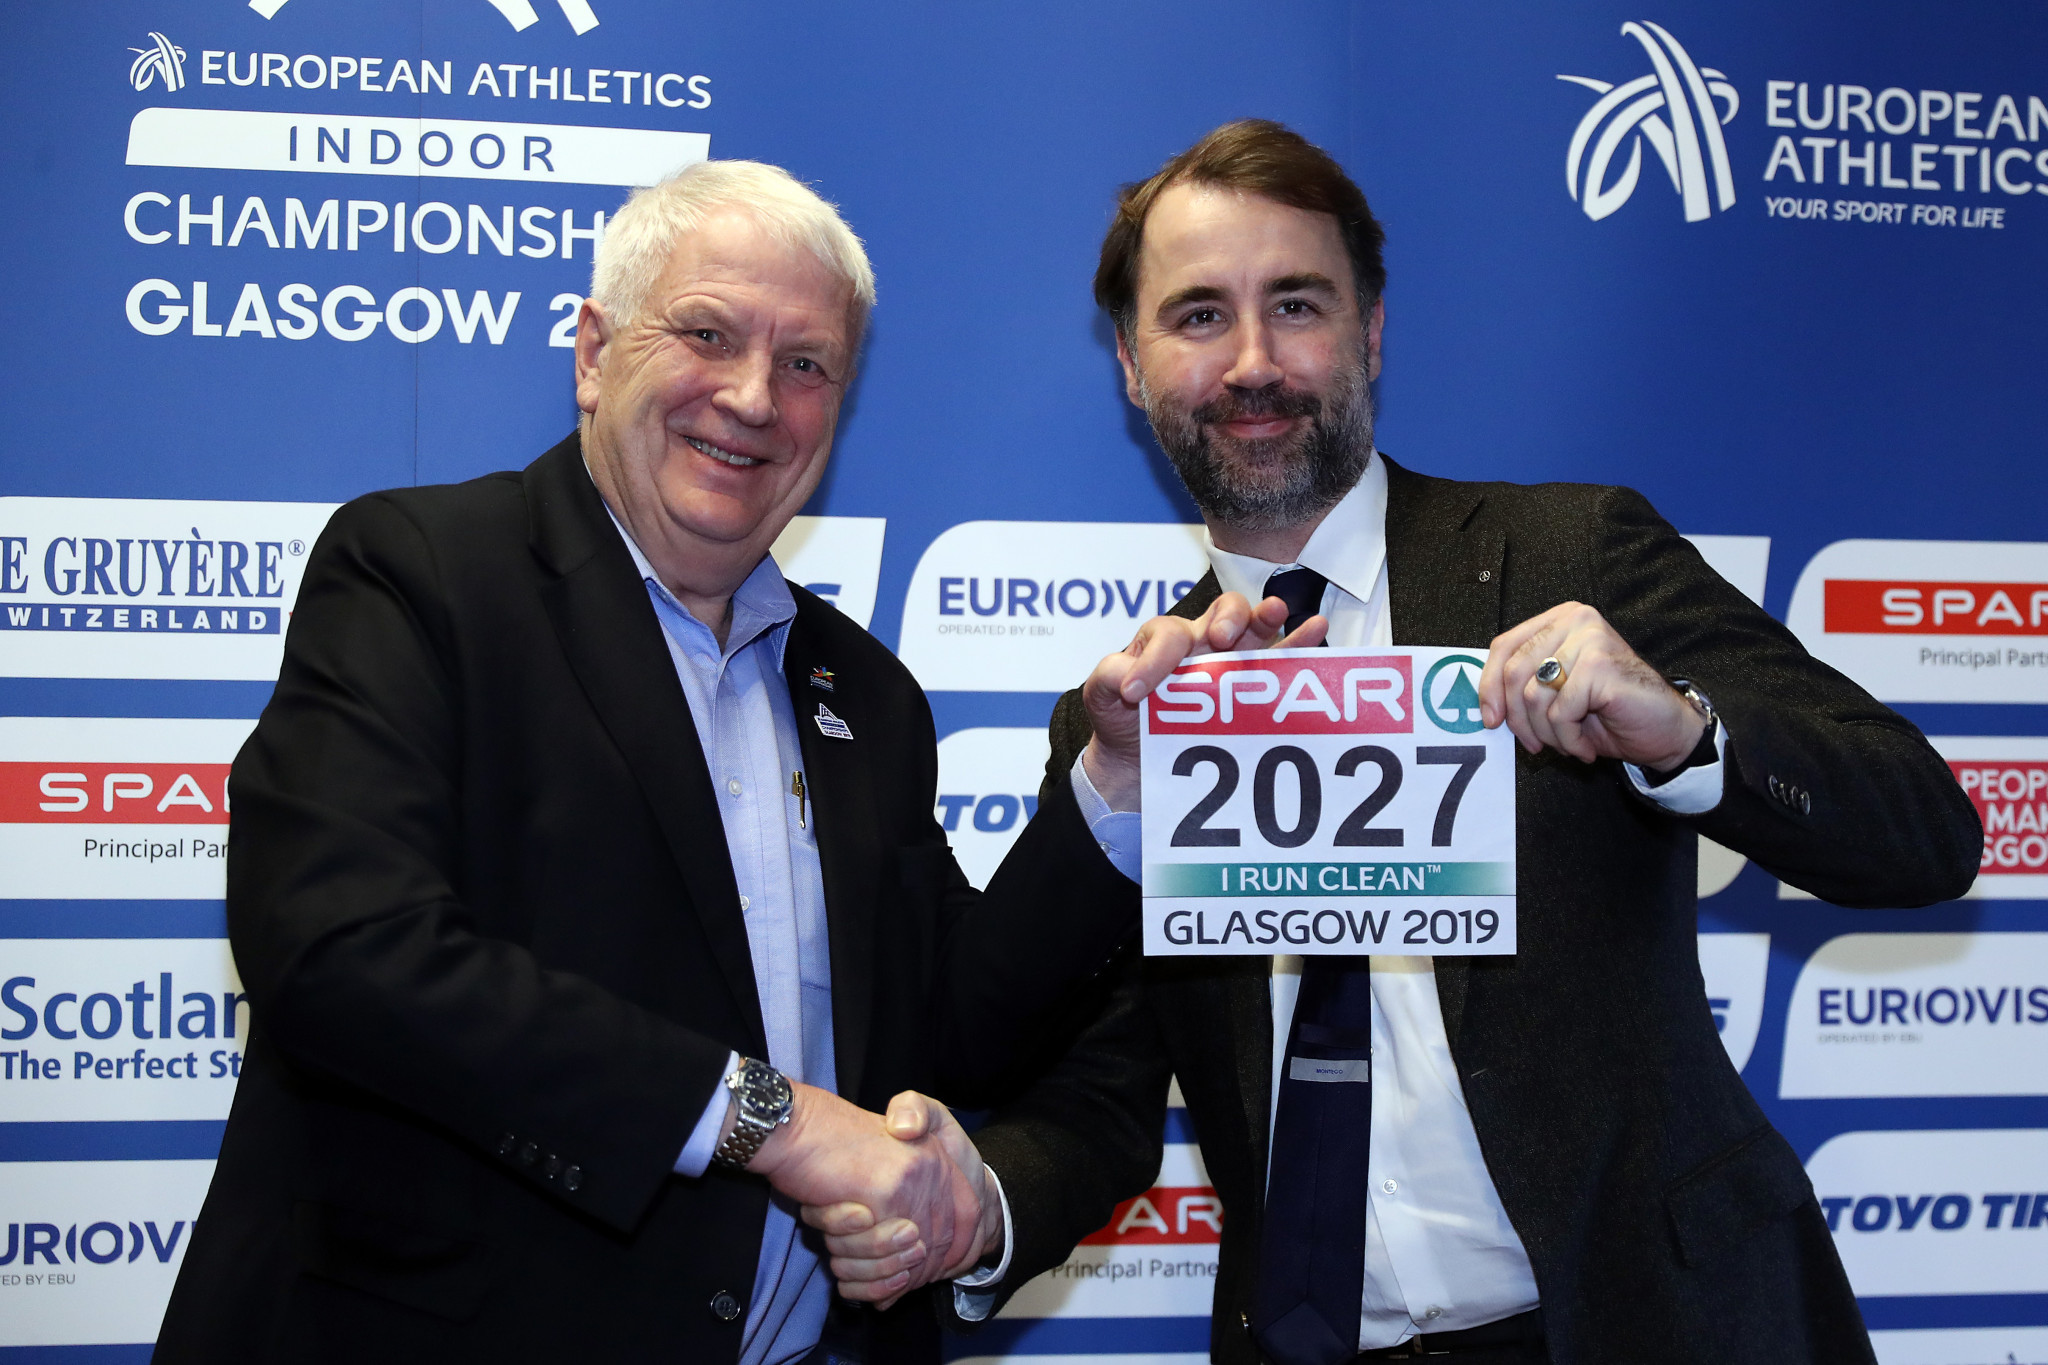 European Athletics announces eight-year extension to SPAR deal on eve of Indoor Championships in Glasgow